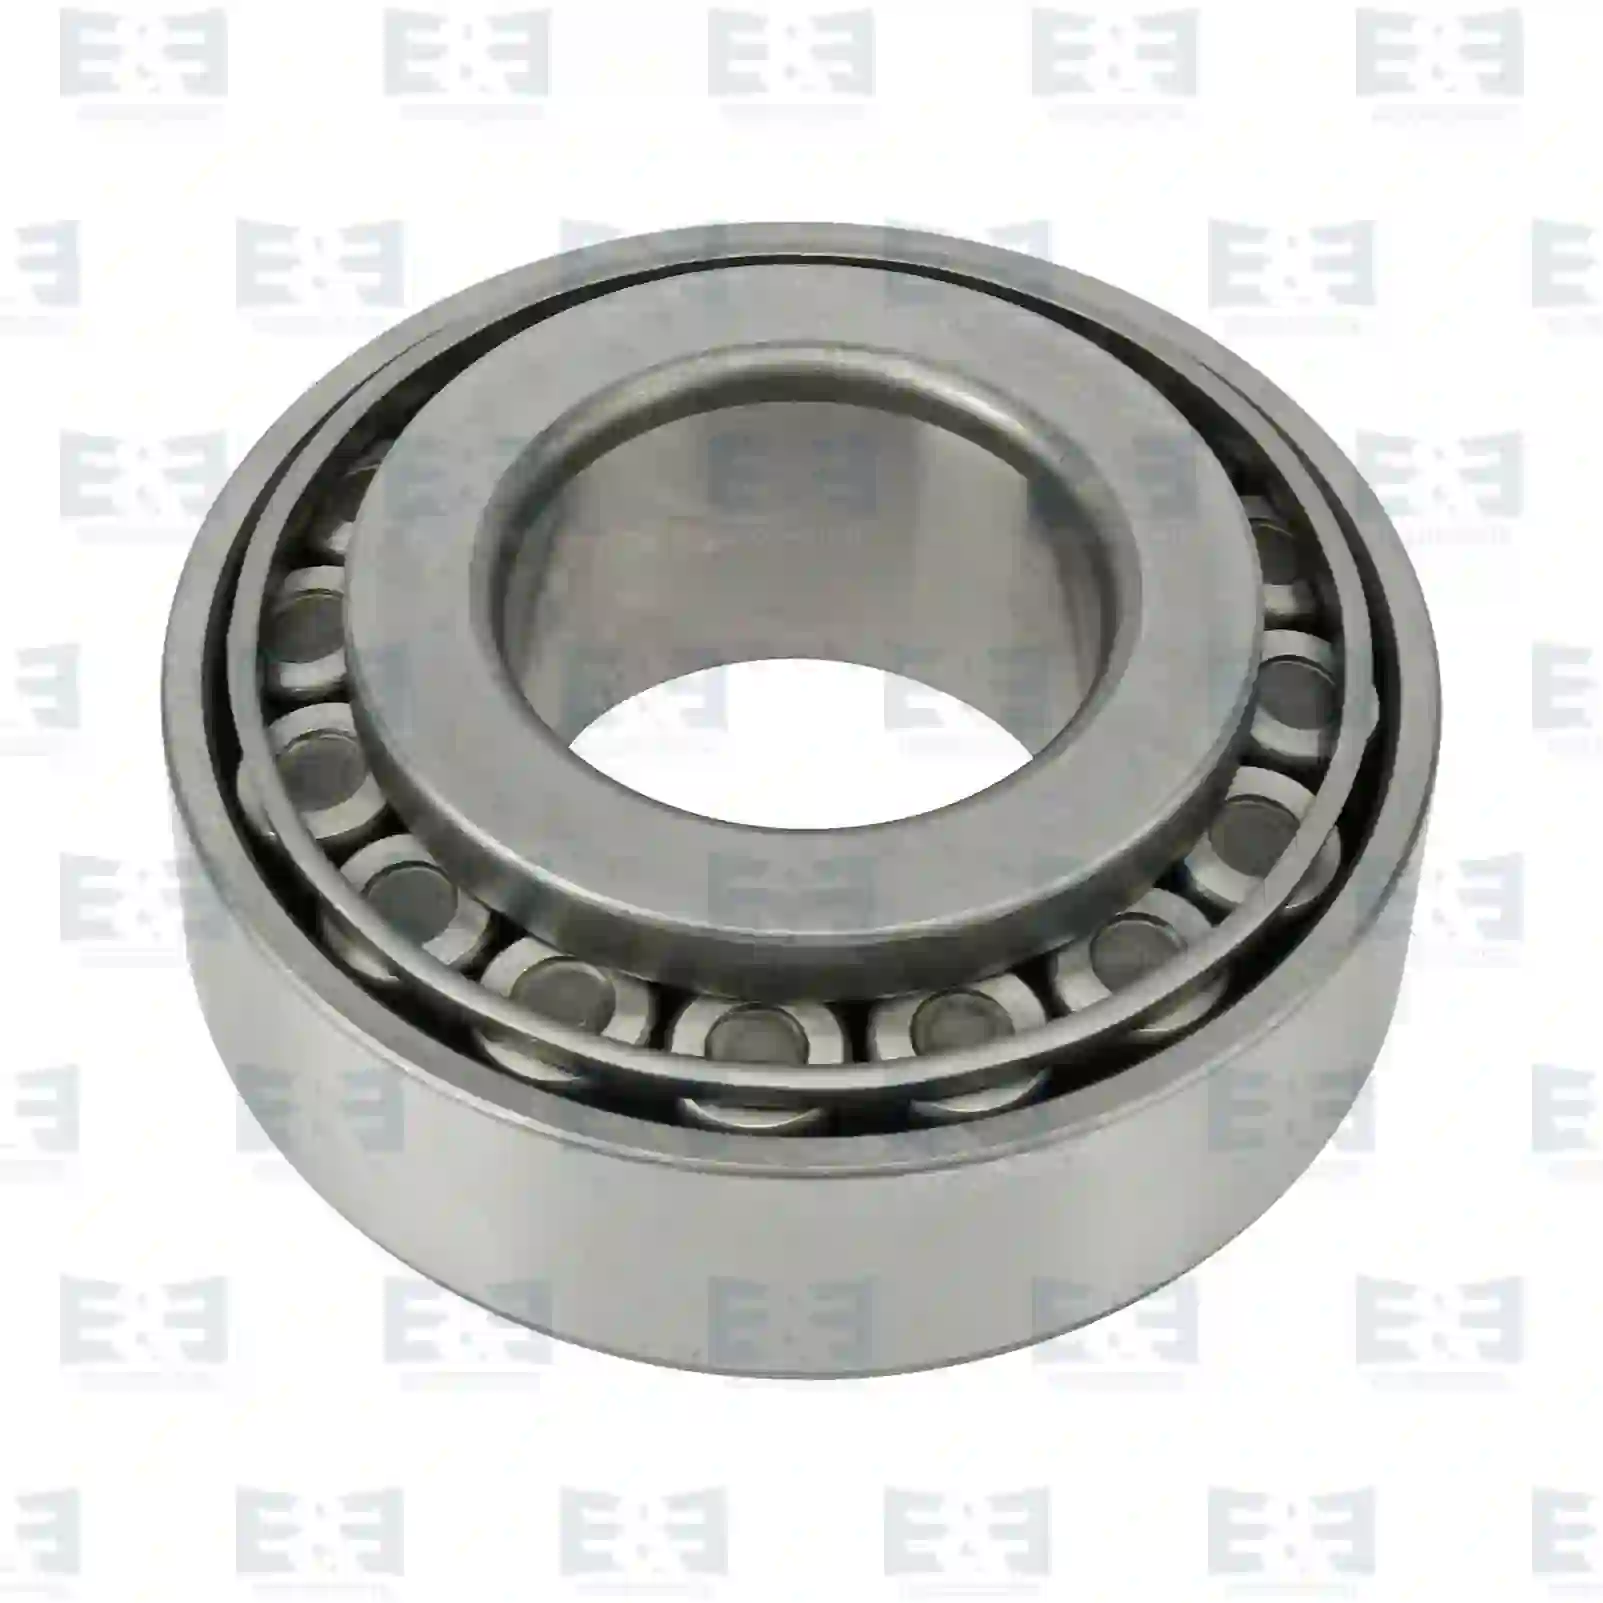 Hub Tapered roller bearing, EE No 2E2284796 ,  oem no:0264066000, 26800390, 01110022, 3612966000, 0119816805, 0119816905, 0159817505, 5000682795, 4200003300, 1301675, 14836, 1911817, EN361966000, 66911710000, 1699340, ZG02974-0008 E&E Truck Spare Parts | Truck Spare Parts, Auotomotive Spare Parts